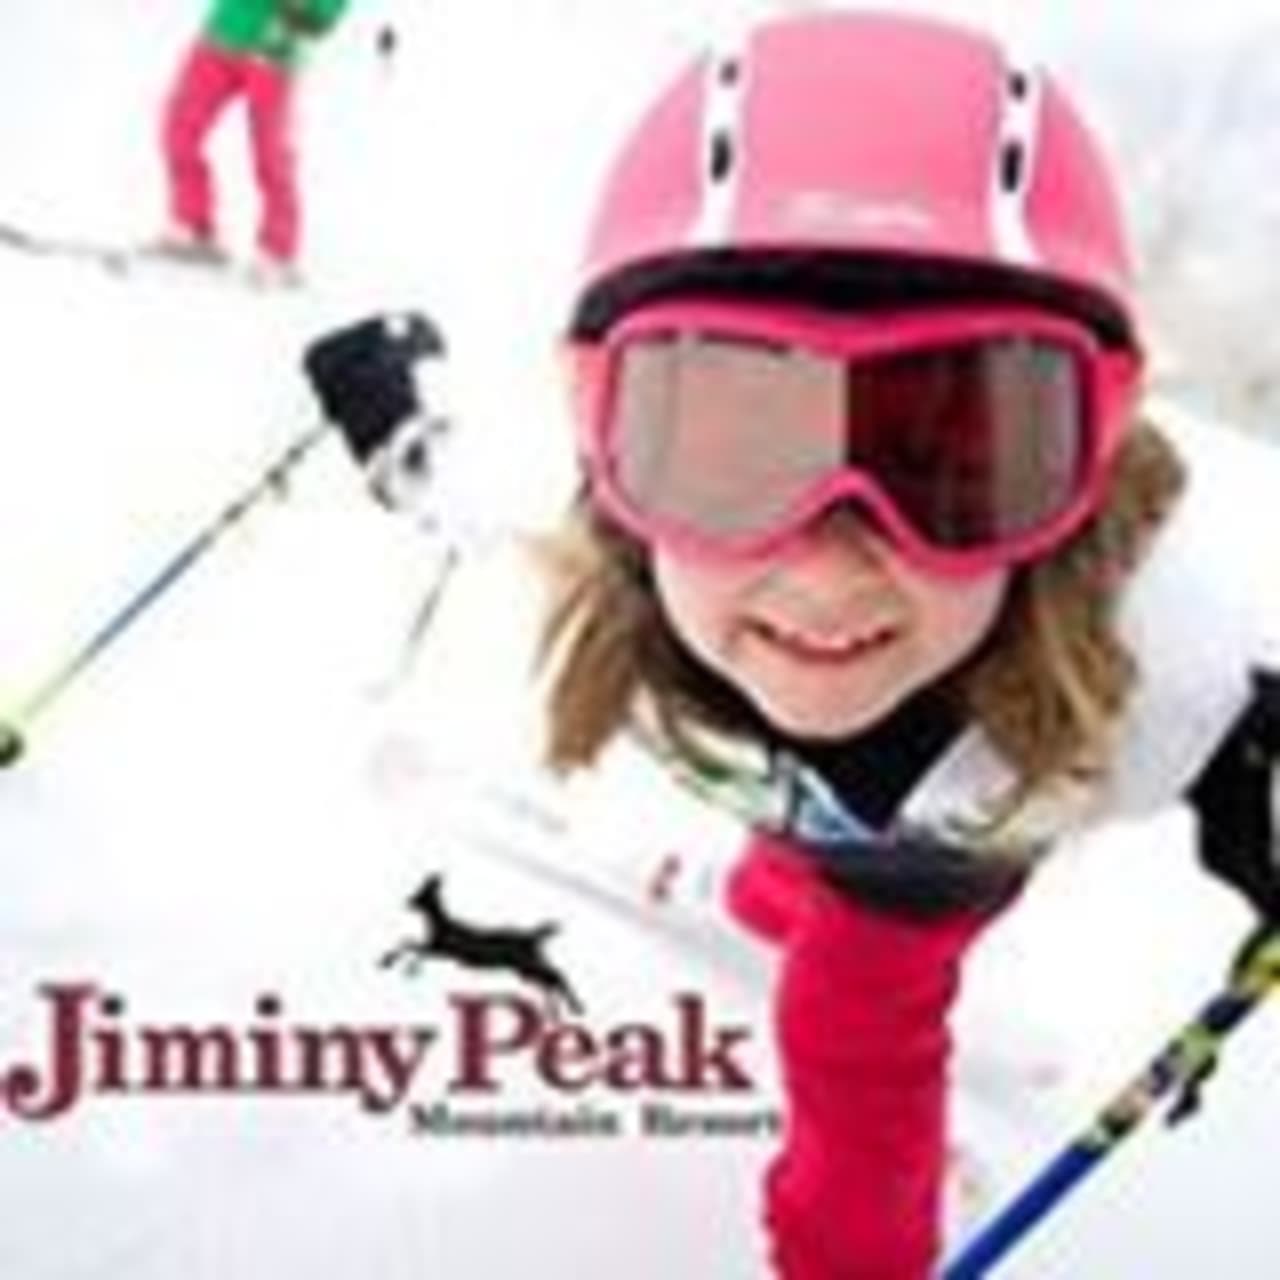 The Briarcliff Manor Recreation Dept. is sponsoring a Family and Friends ski outing to Jiminy Peak.